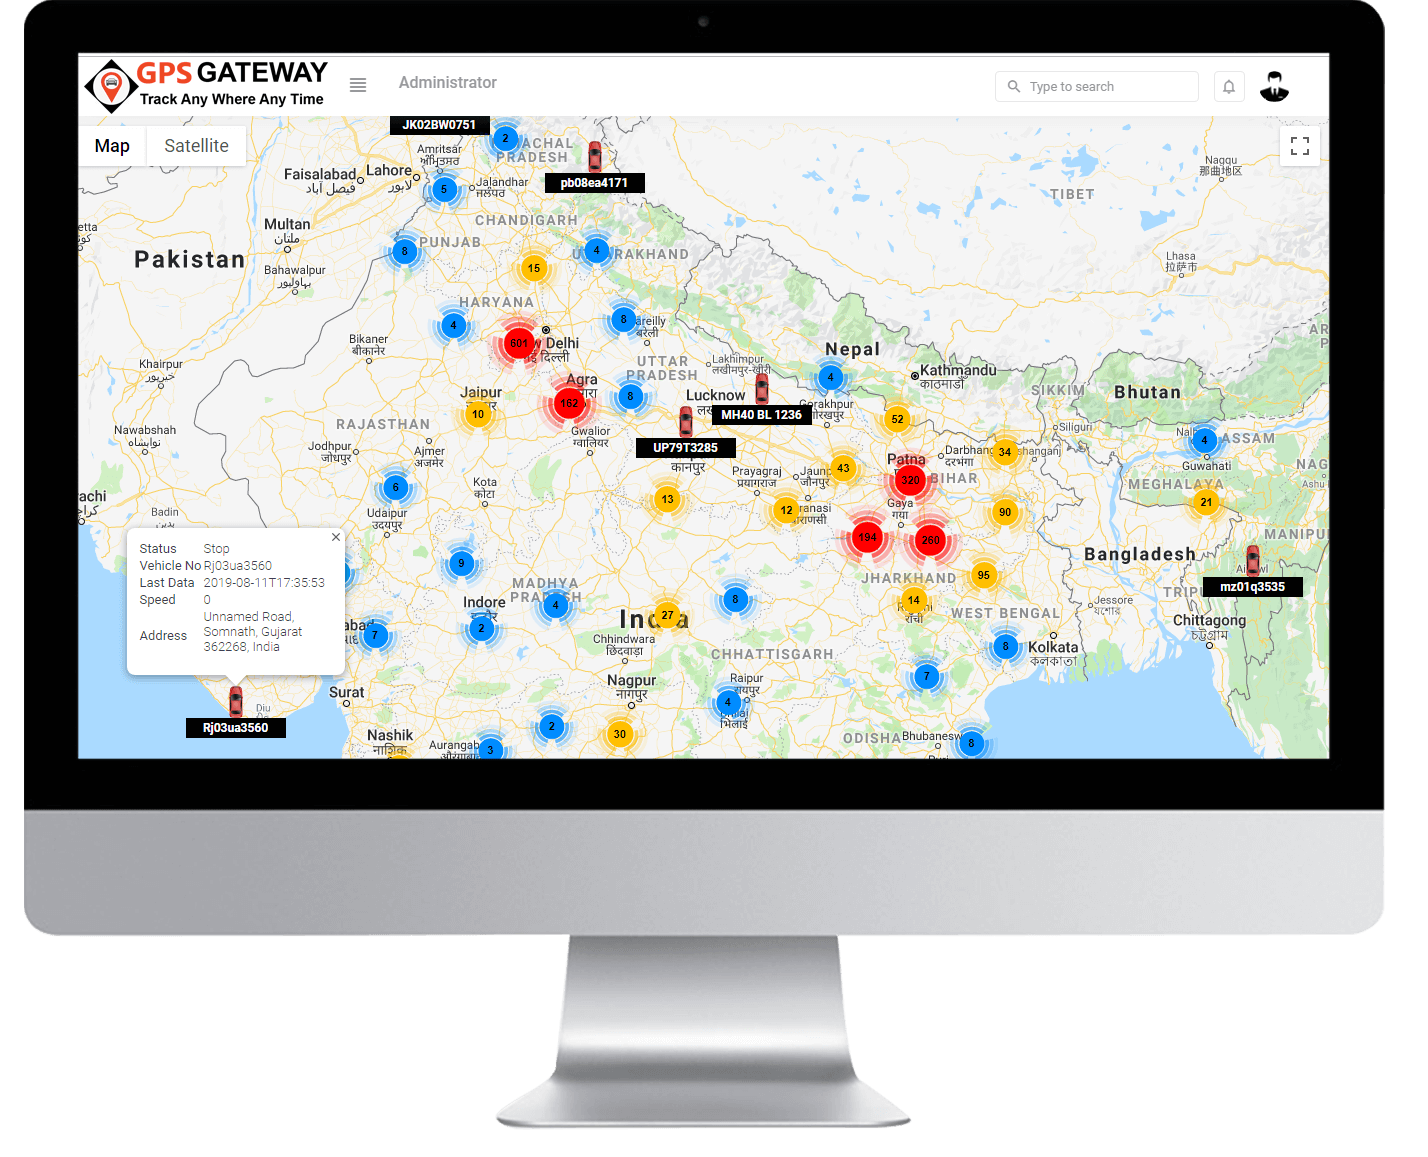  laptop location tracking, laptop tracking hardware, gps tracking software free download for laptop, location tracking platform for laptop and pc, gps tracker for laptop, laptop tracking